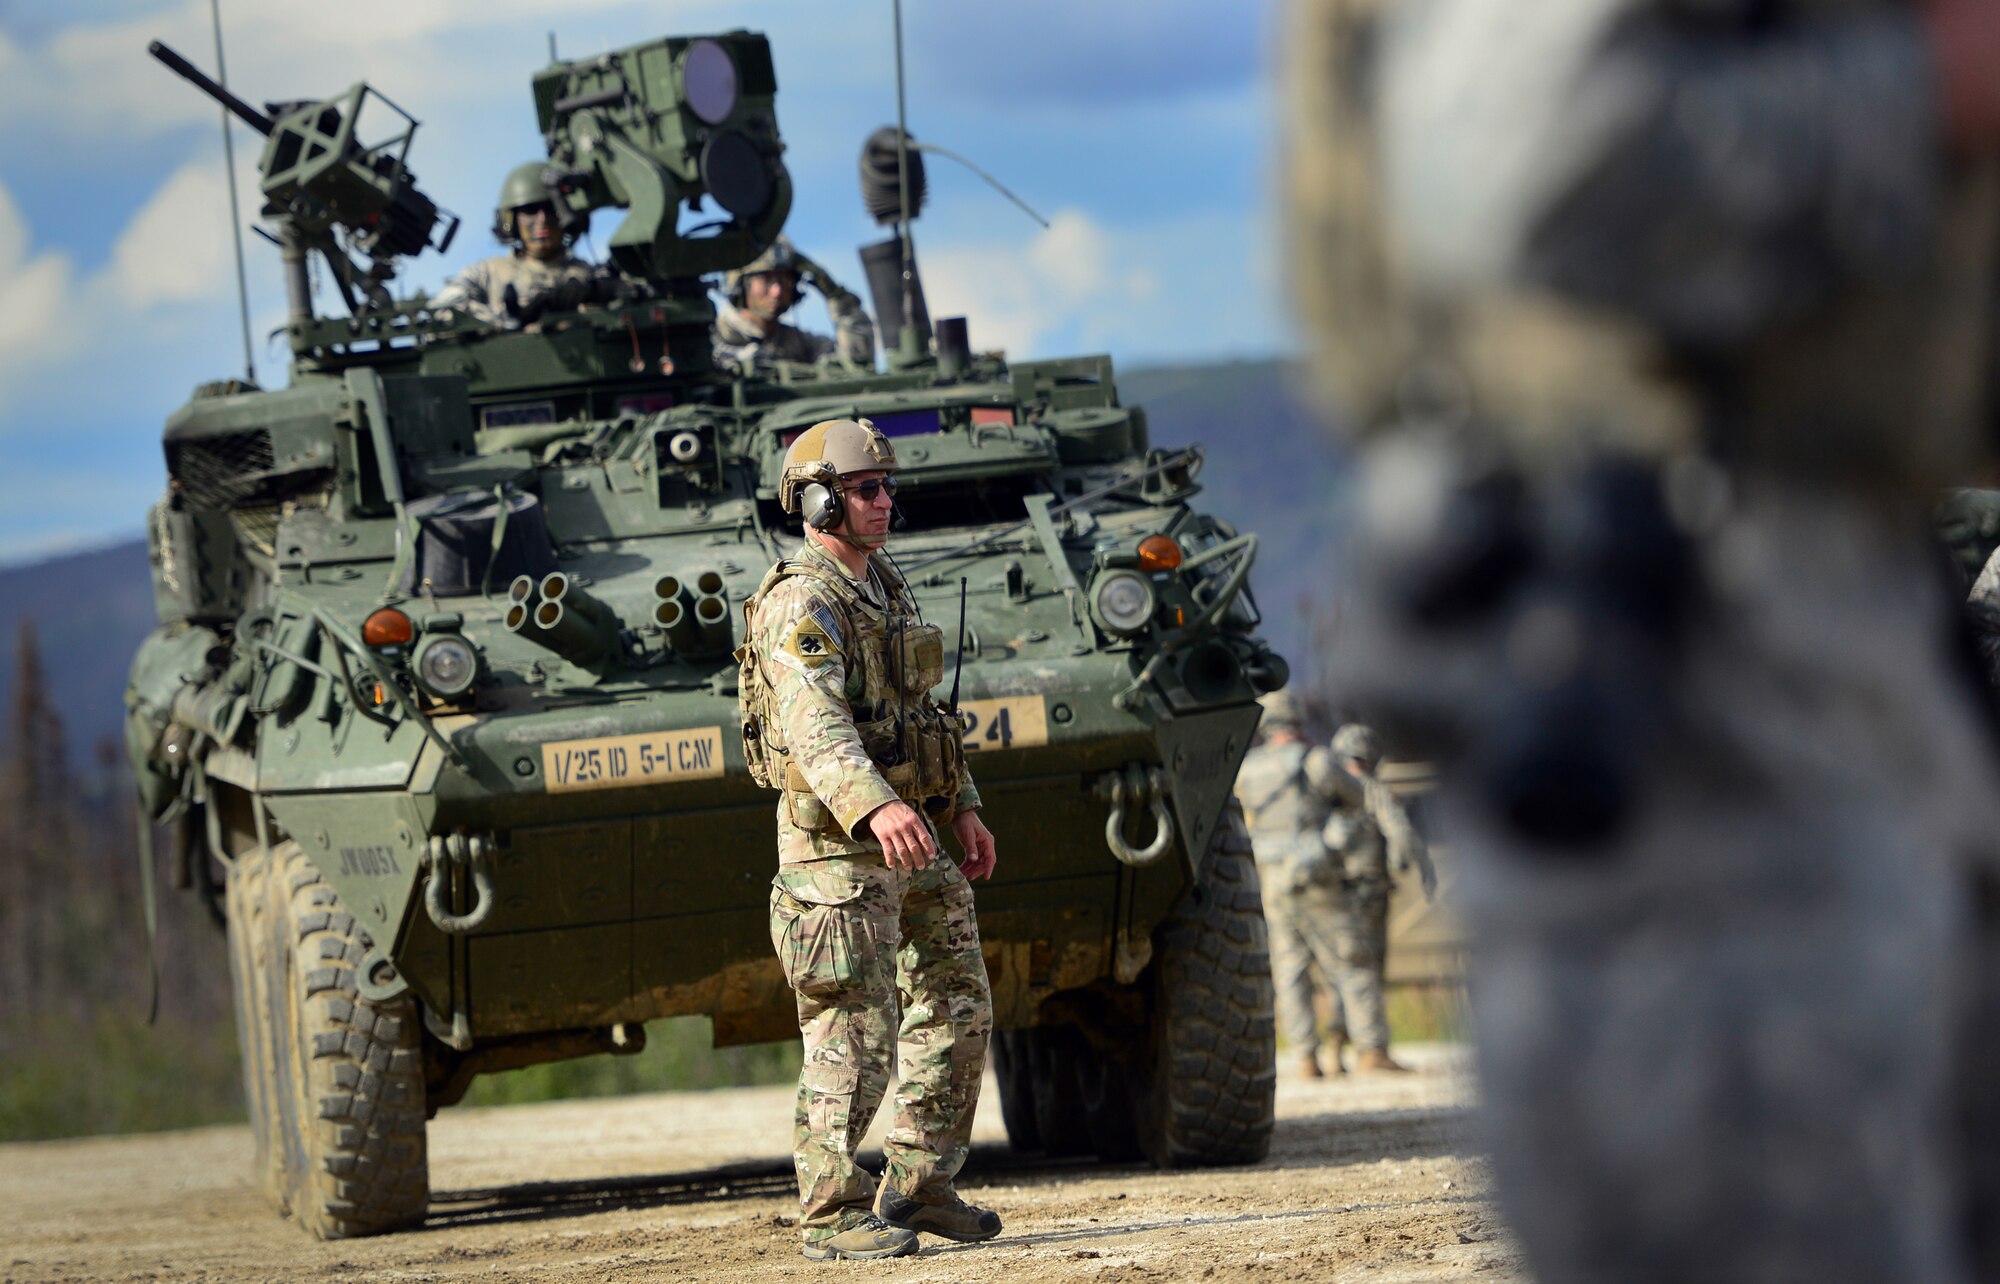 U.S. Air Force Lt. Col. J.B. Waltermire, squadron commander of the 140th Air Support Operations Squadron, walks in front of a M127 Stryker Reconnaissance Vehicle before Soldiers assigned to the 5th Squadron, 1st Cavalry Regiment, 1st Stryker Brigade Combat Team, U.S. Army Alaska, and U.S. Air Force Air National Guard Joint Terminal Attack Controllers train together at Yukon Training Area, Alaska, to hone joint interoperability and close air support capabilities in a high operations tempo simulated combat environment during the Red Flag-Alaska 14-3 exercise, Wednesday, Aug. 20, 2014.  Joint Terminal Attack Controllers deploy with Army units, and bring to the fight an ability to quickly and accurately call close air support to engage enemy targets on the ground. Red Flag-Alaska, a series of Pacific Air Forces commander-directed field training exercises for U.S. forces, provides joint offensive counter-air, interdiction, close air support, and large force employment training in a simulated combat environment. (U.S. Air Force photo/Justin Connaher)